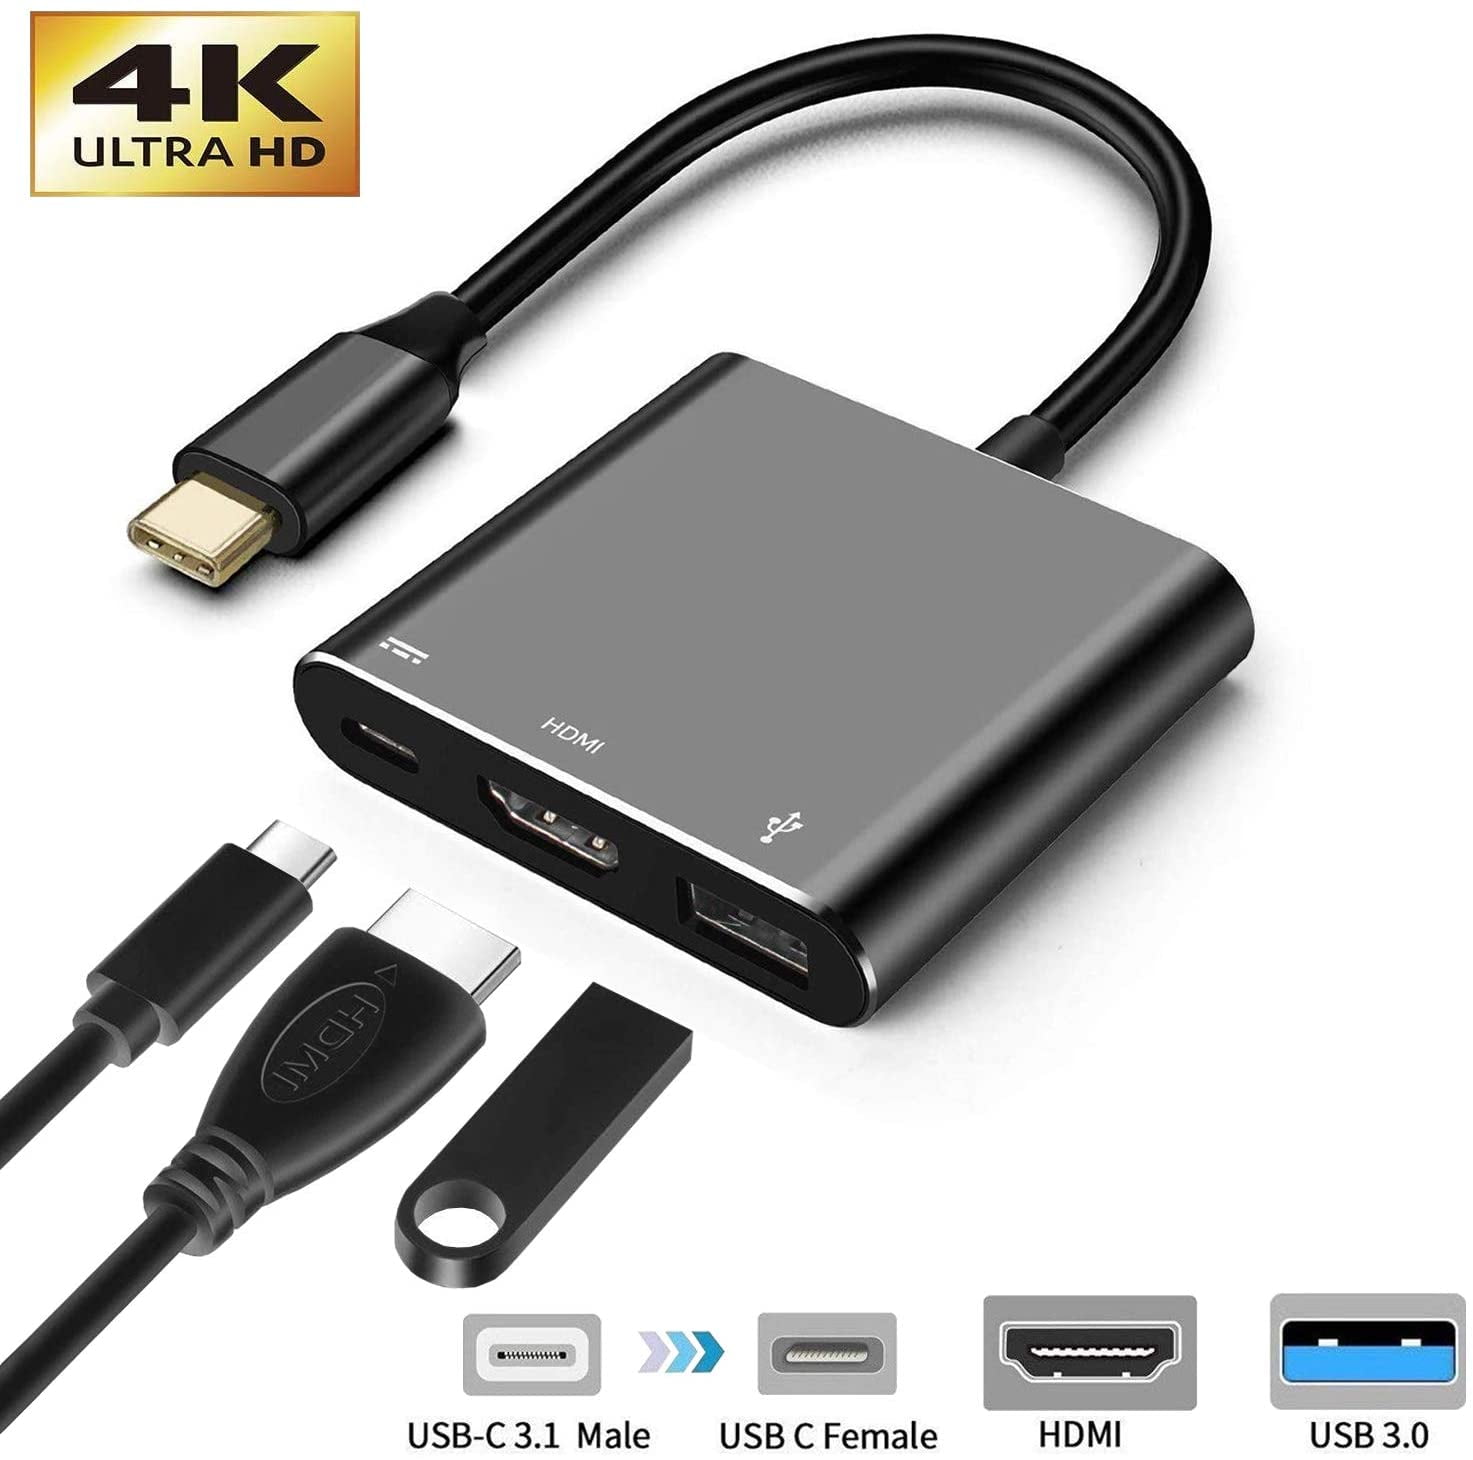 AMALINK USB-C to HDMI Cable Space Grey 4K 6 feet USB-C to HDMI with USB Charging Port Galaxy S9/S8/Note 8 Latest Ultrabook with USB-C for MacBook 2017 Thunderbolt 3 Compatible